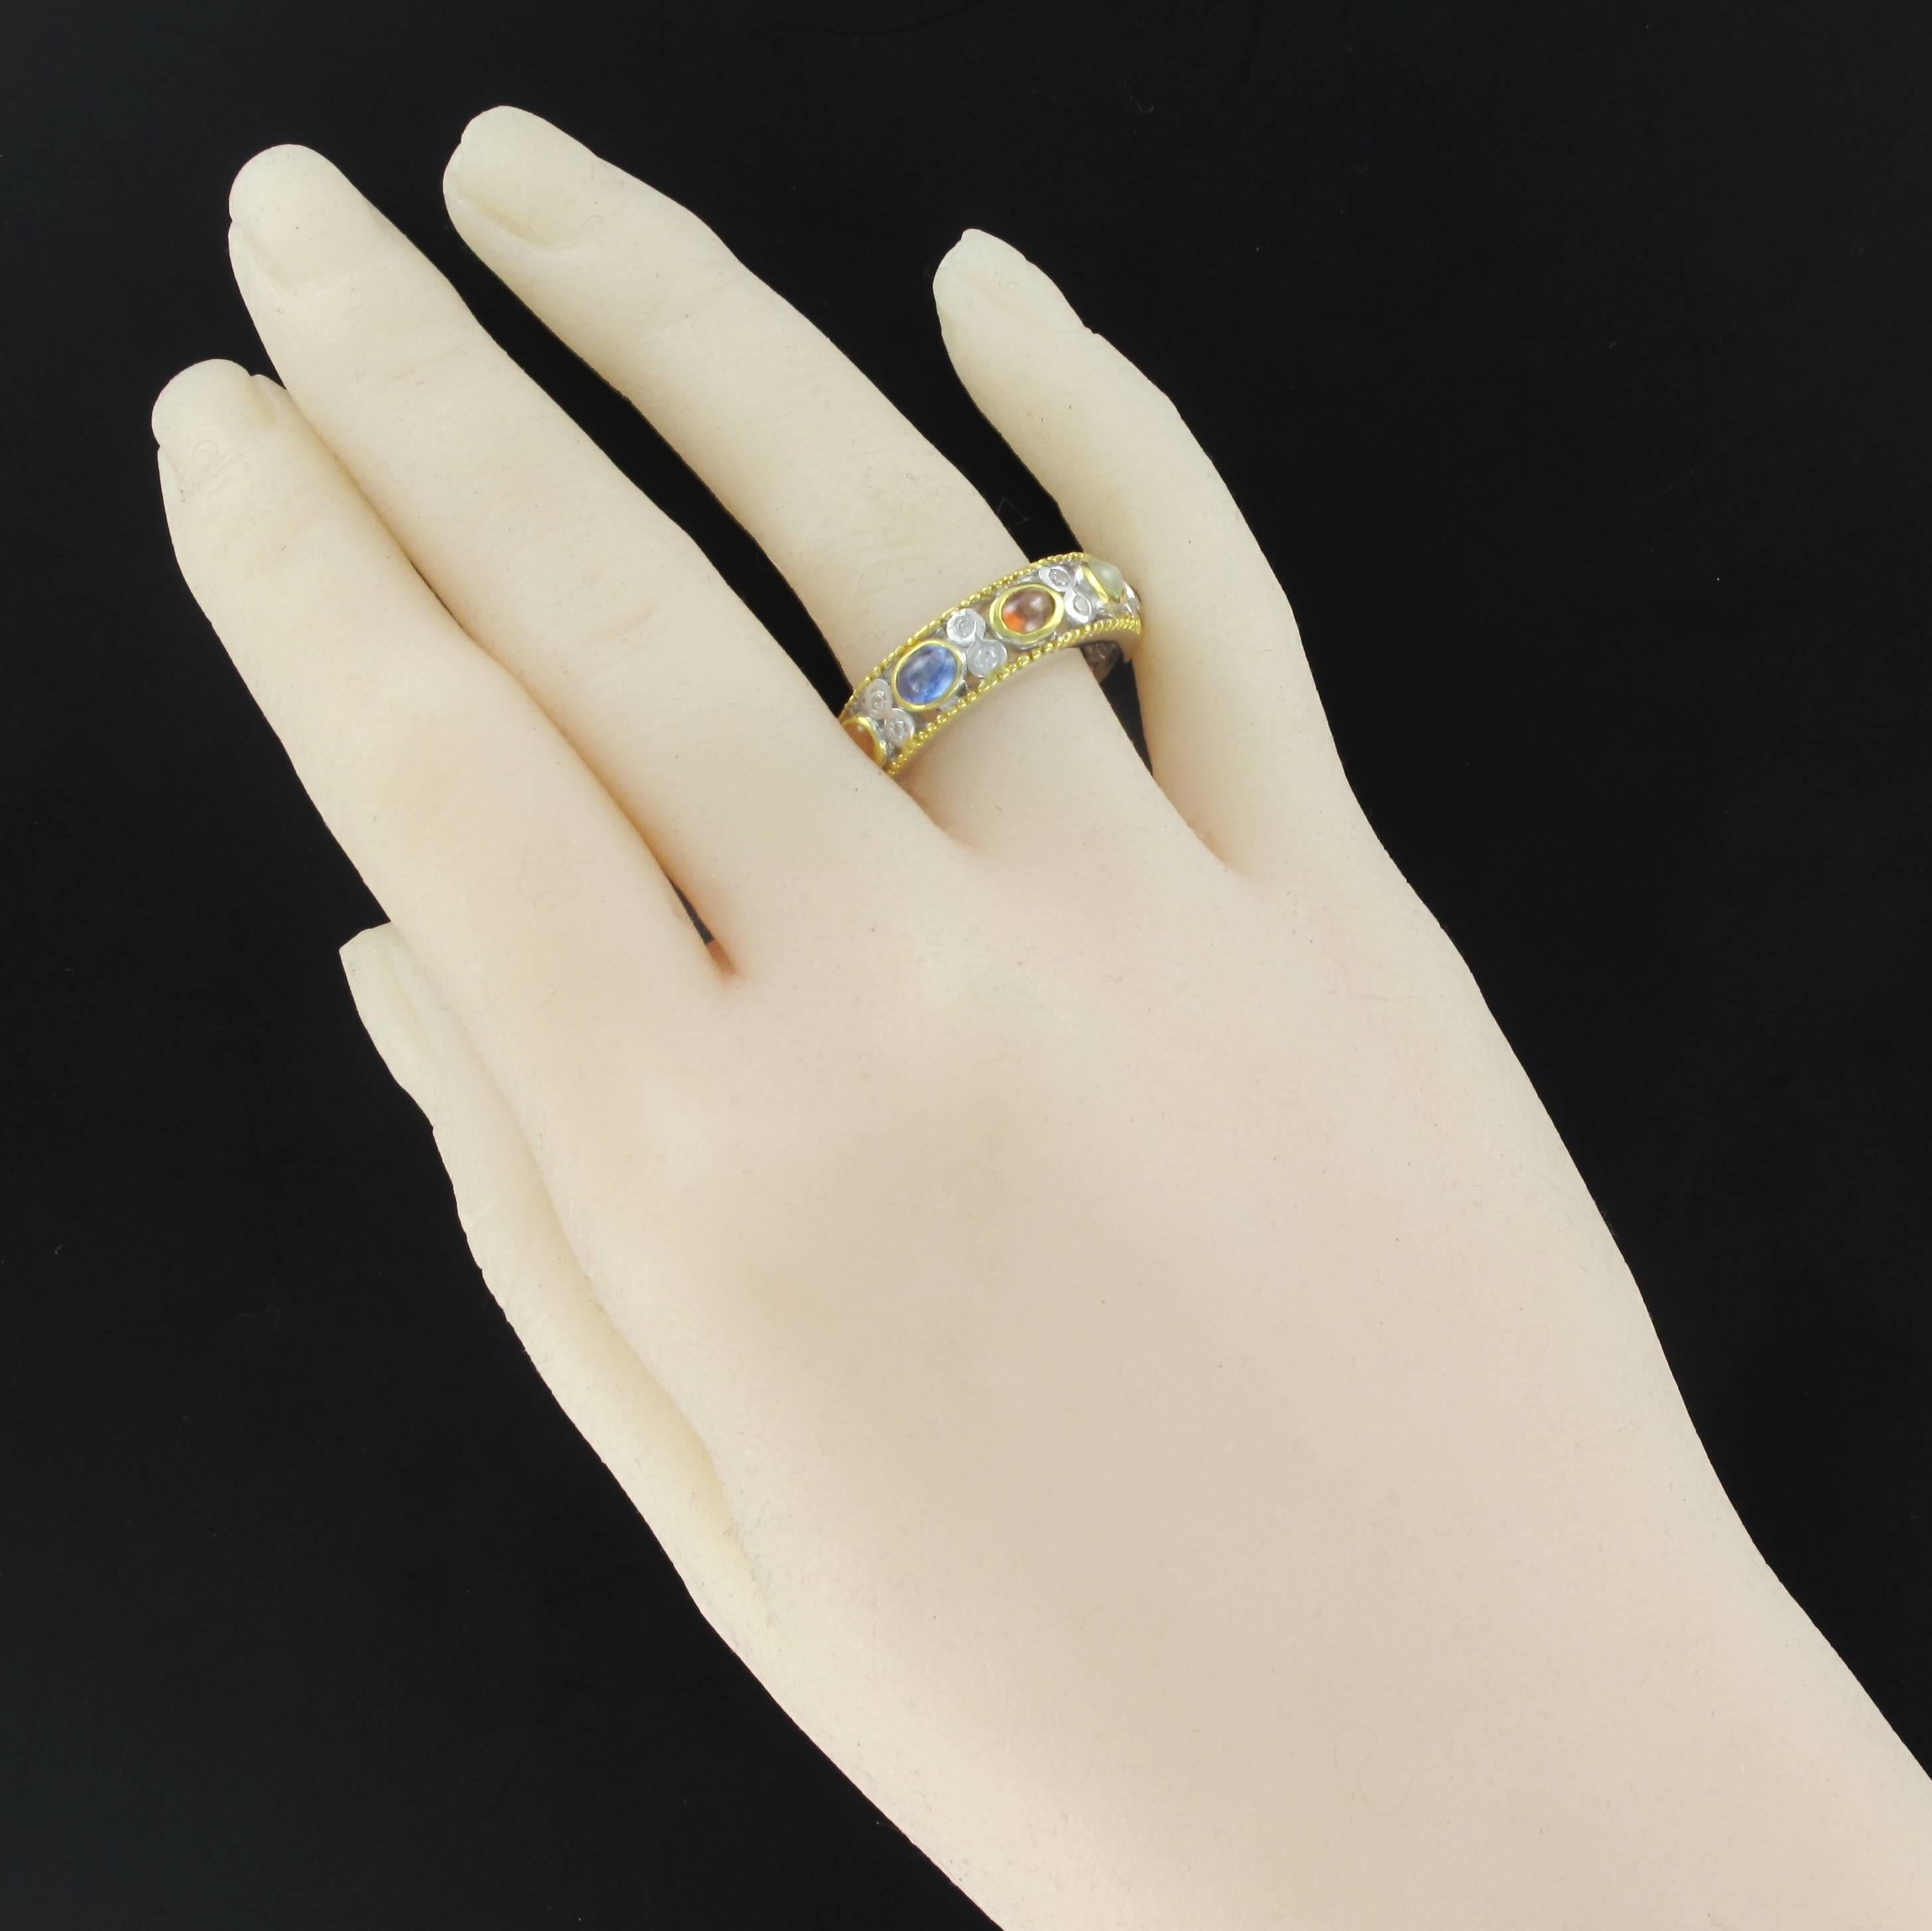 Silver ring, 925.
This band ring is closed set on its top of an alternation of white and brown zircons, sapphire, ruby and agate, closed set. The border of the ring is beaded and rhodium-plated yellow gold.
Gemstone weight: 4.90 carats